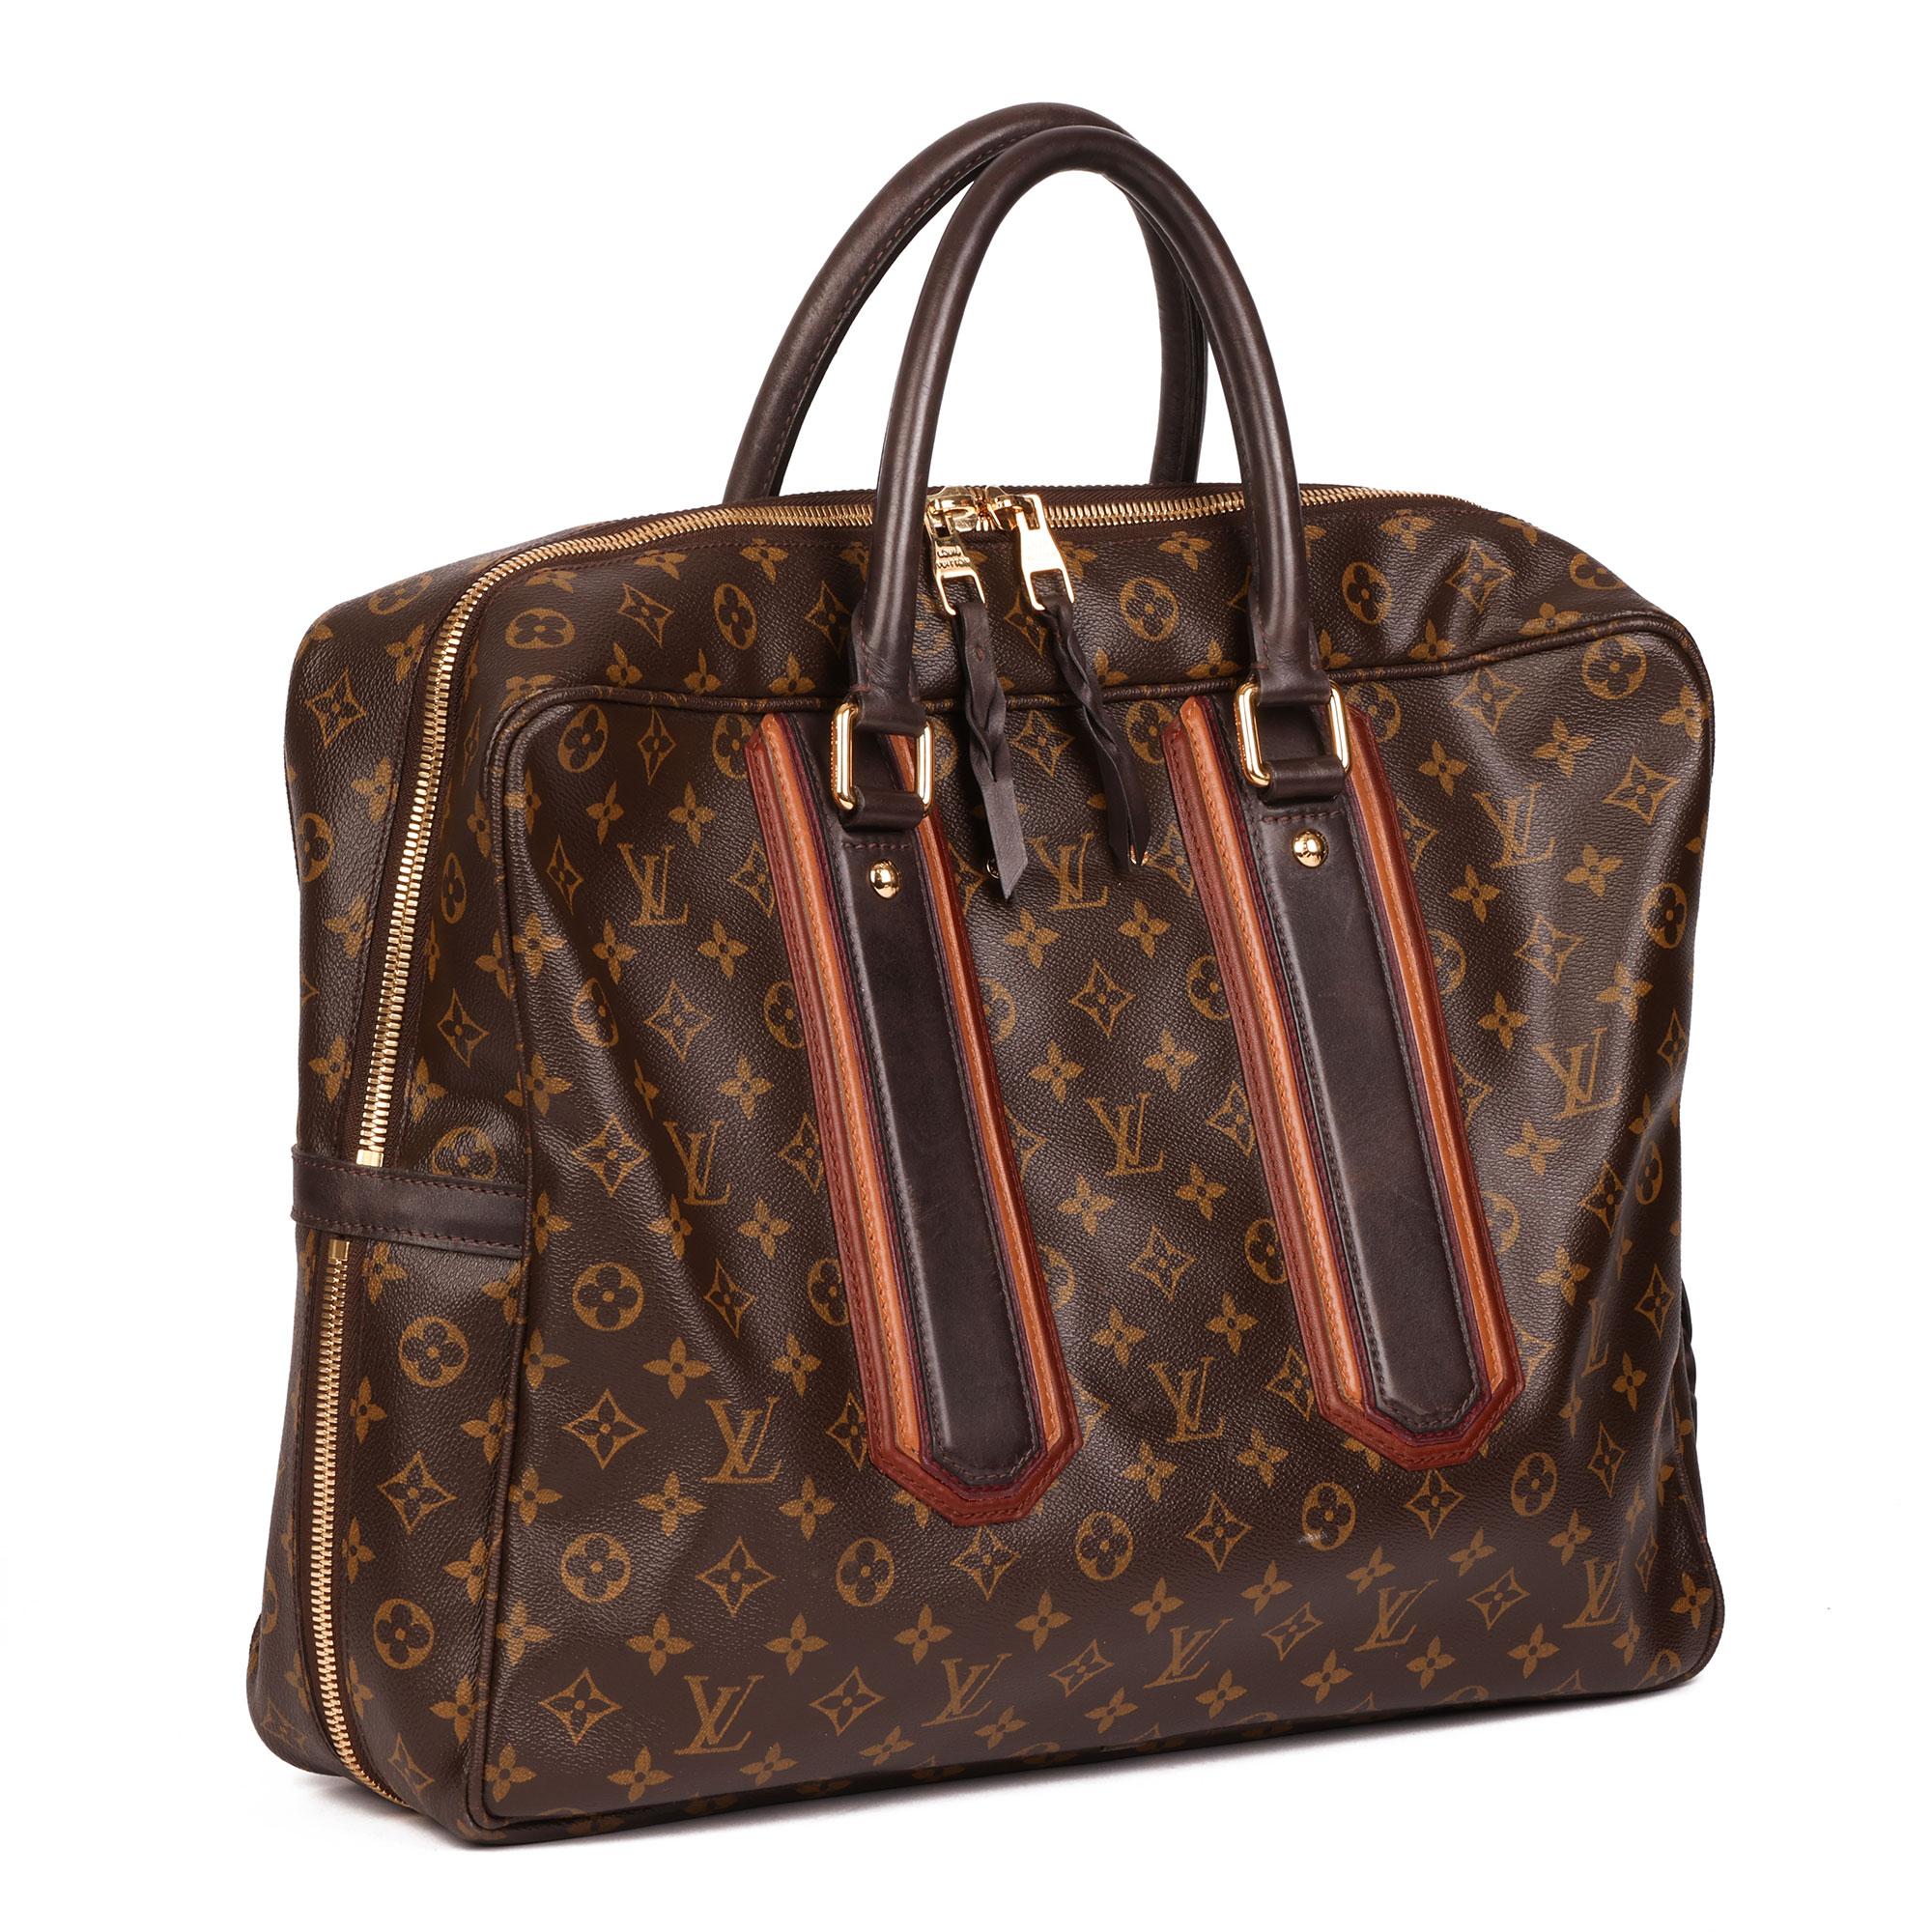 LOUIS VUITTON
Brown Monogram Coated Canvas & Vachetta Leather Geant Bequia Porte Document

Xupes Reference: CB475
Serial Number: AR3077
Age (Circa): 2007
Accompanied By: Louis Vuitton Dust Bag, Luggage Tag, Padlock, Keys, Handle Keeper
Authenticity